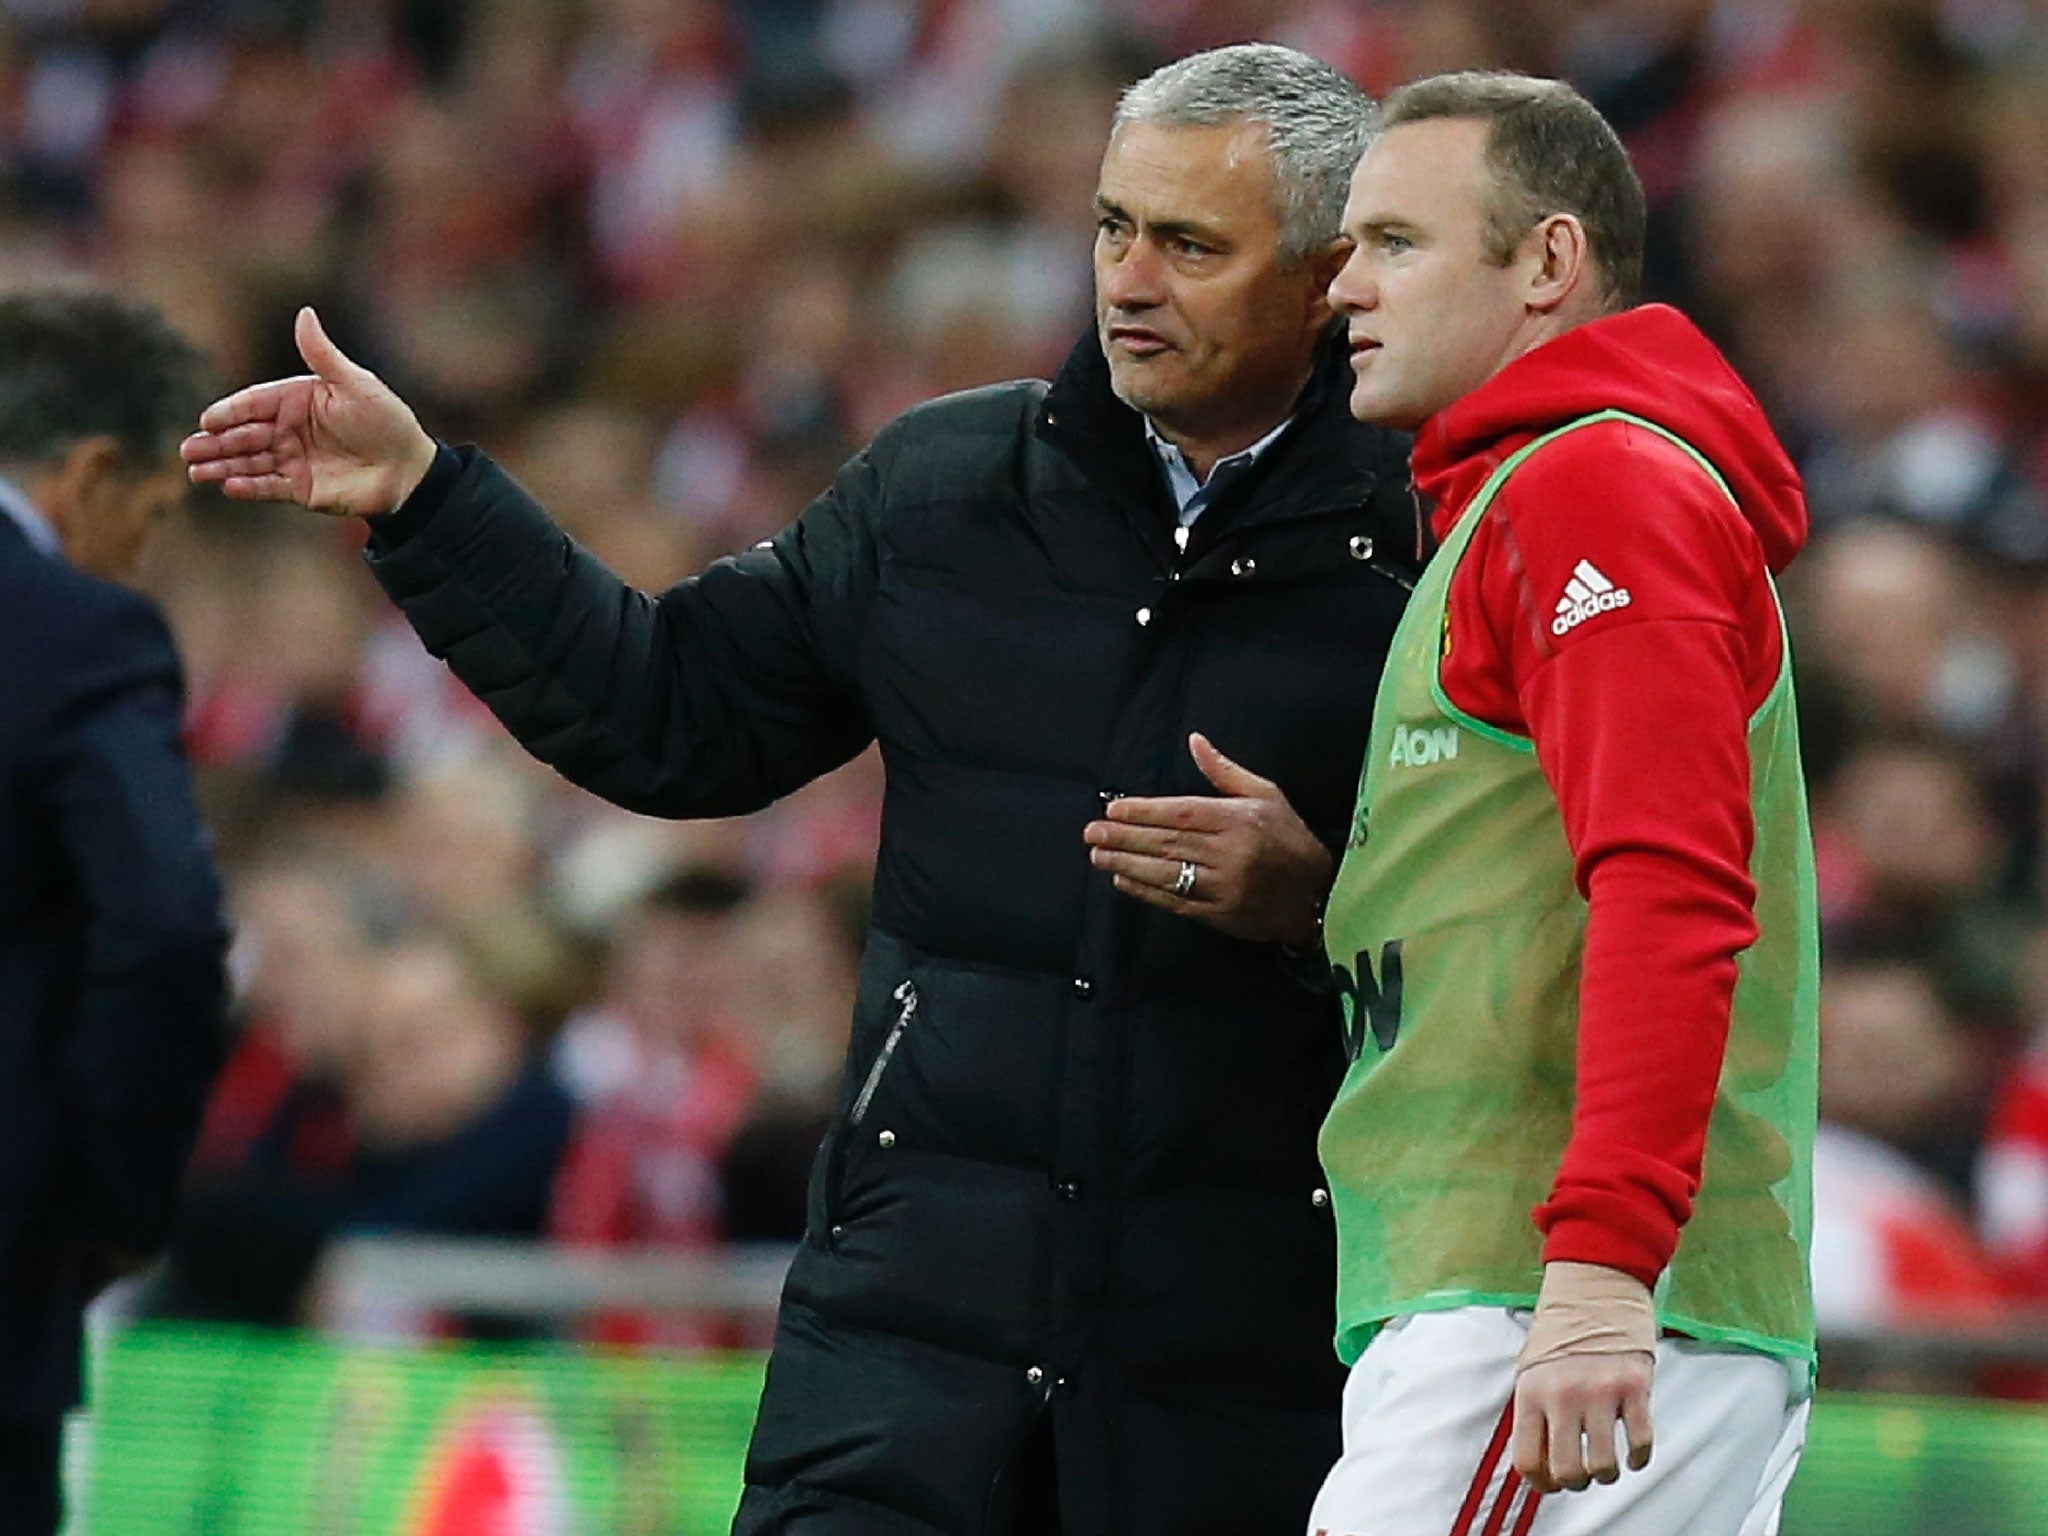 Jose Mourinho has confidence in playing Wayne Rooney even though he is struggling with injury